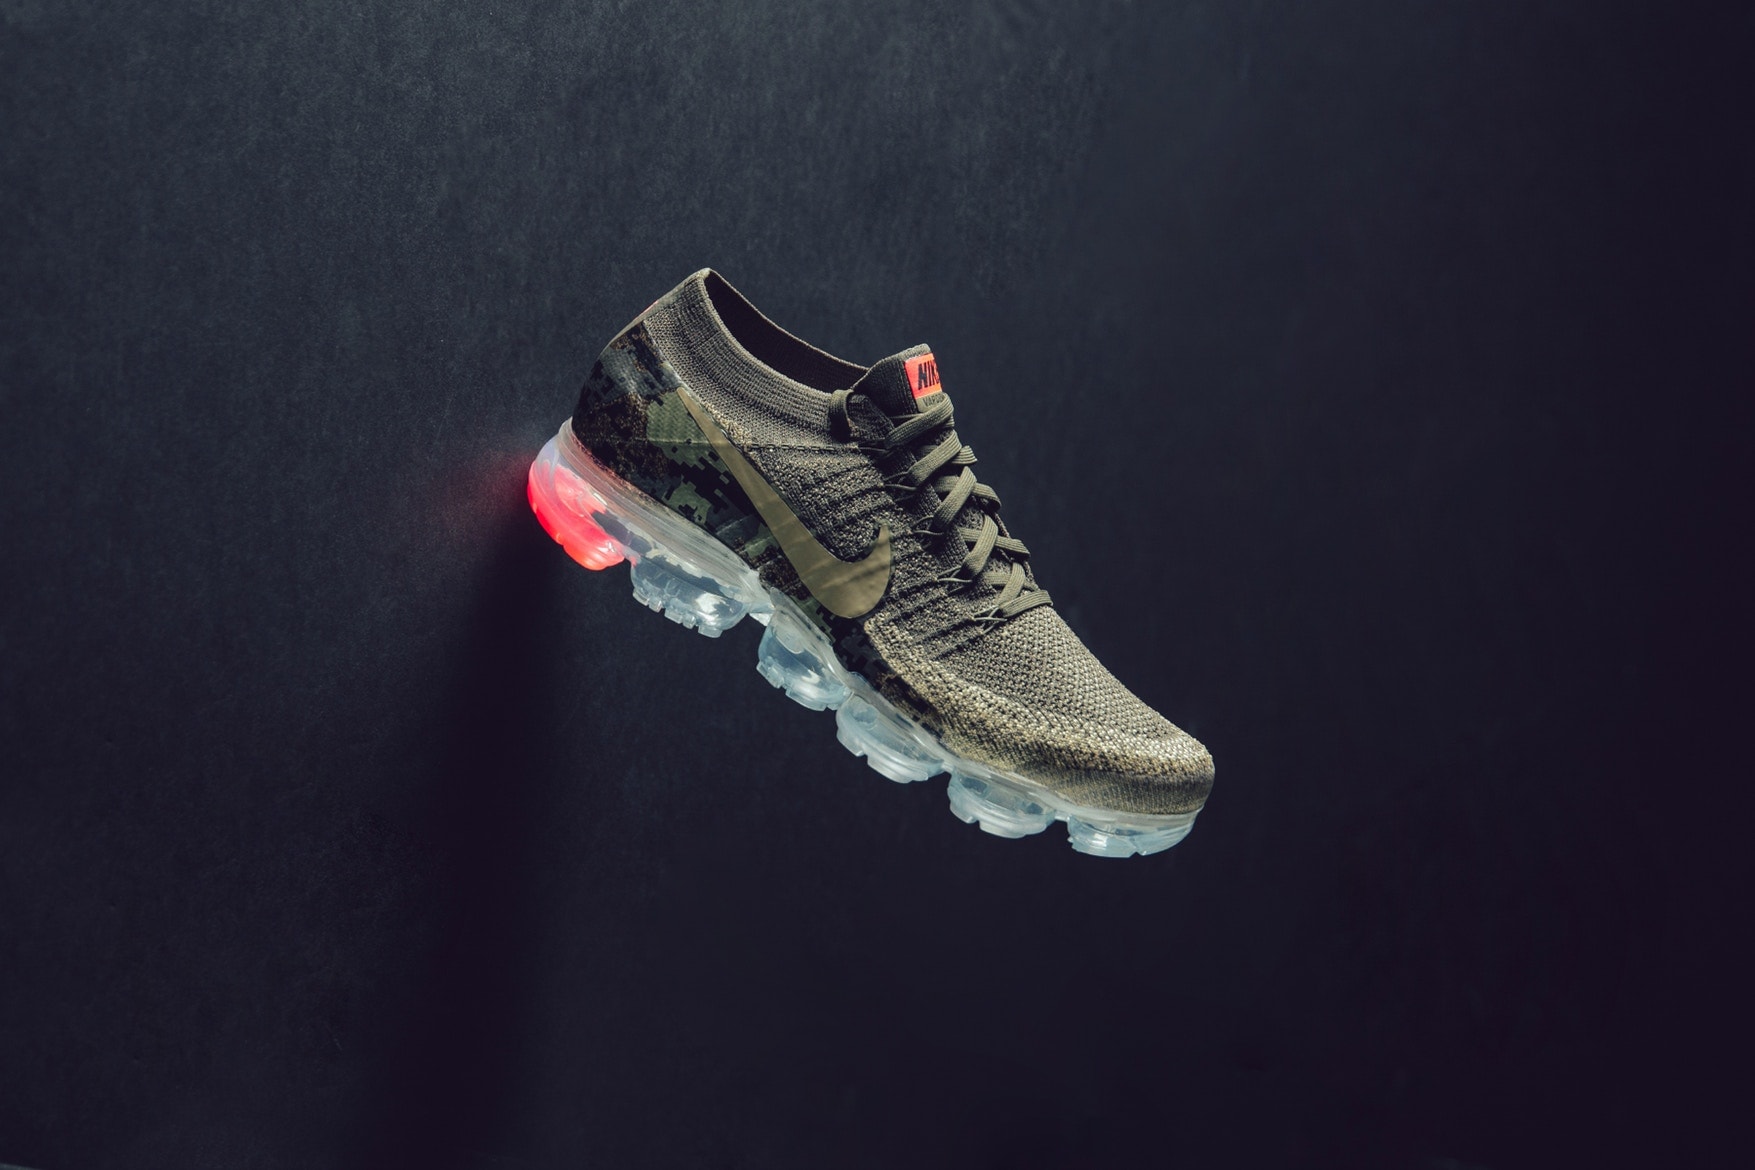 Nike Air Vapormax Flyknit「Neutral Olive」全新配色鞋款